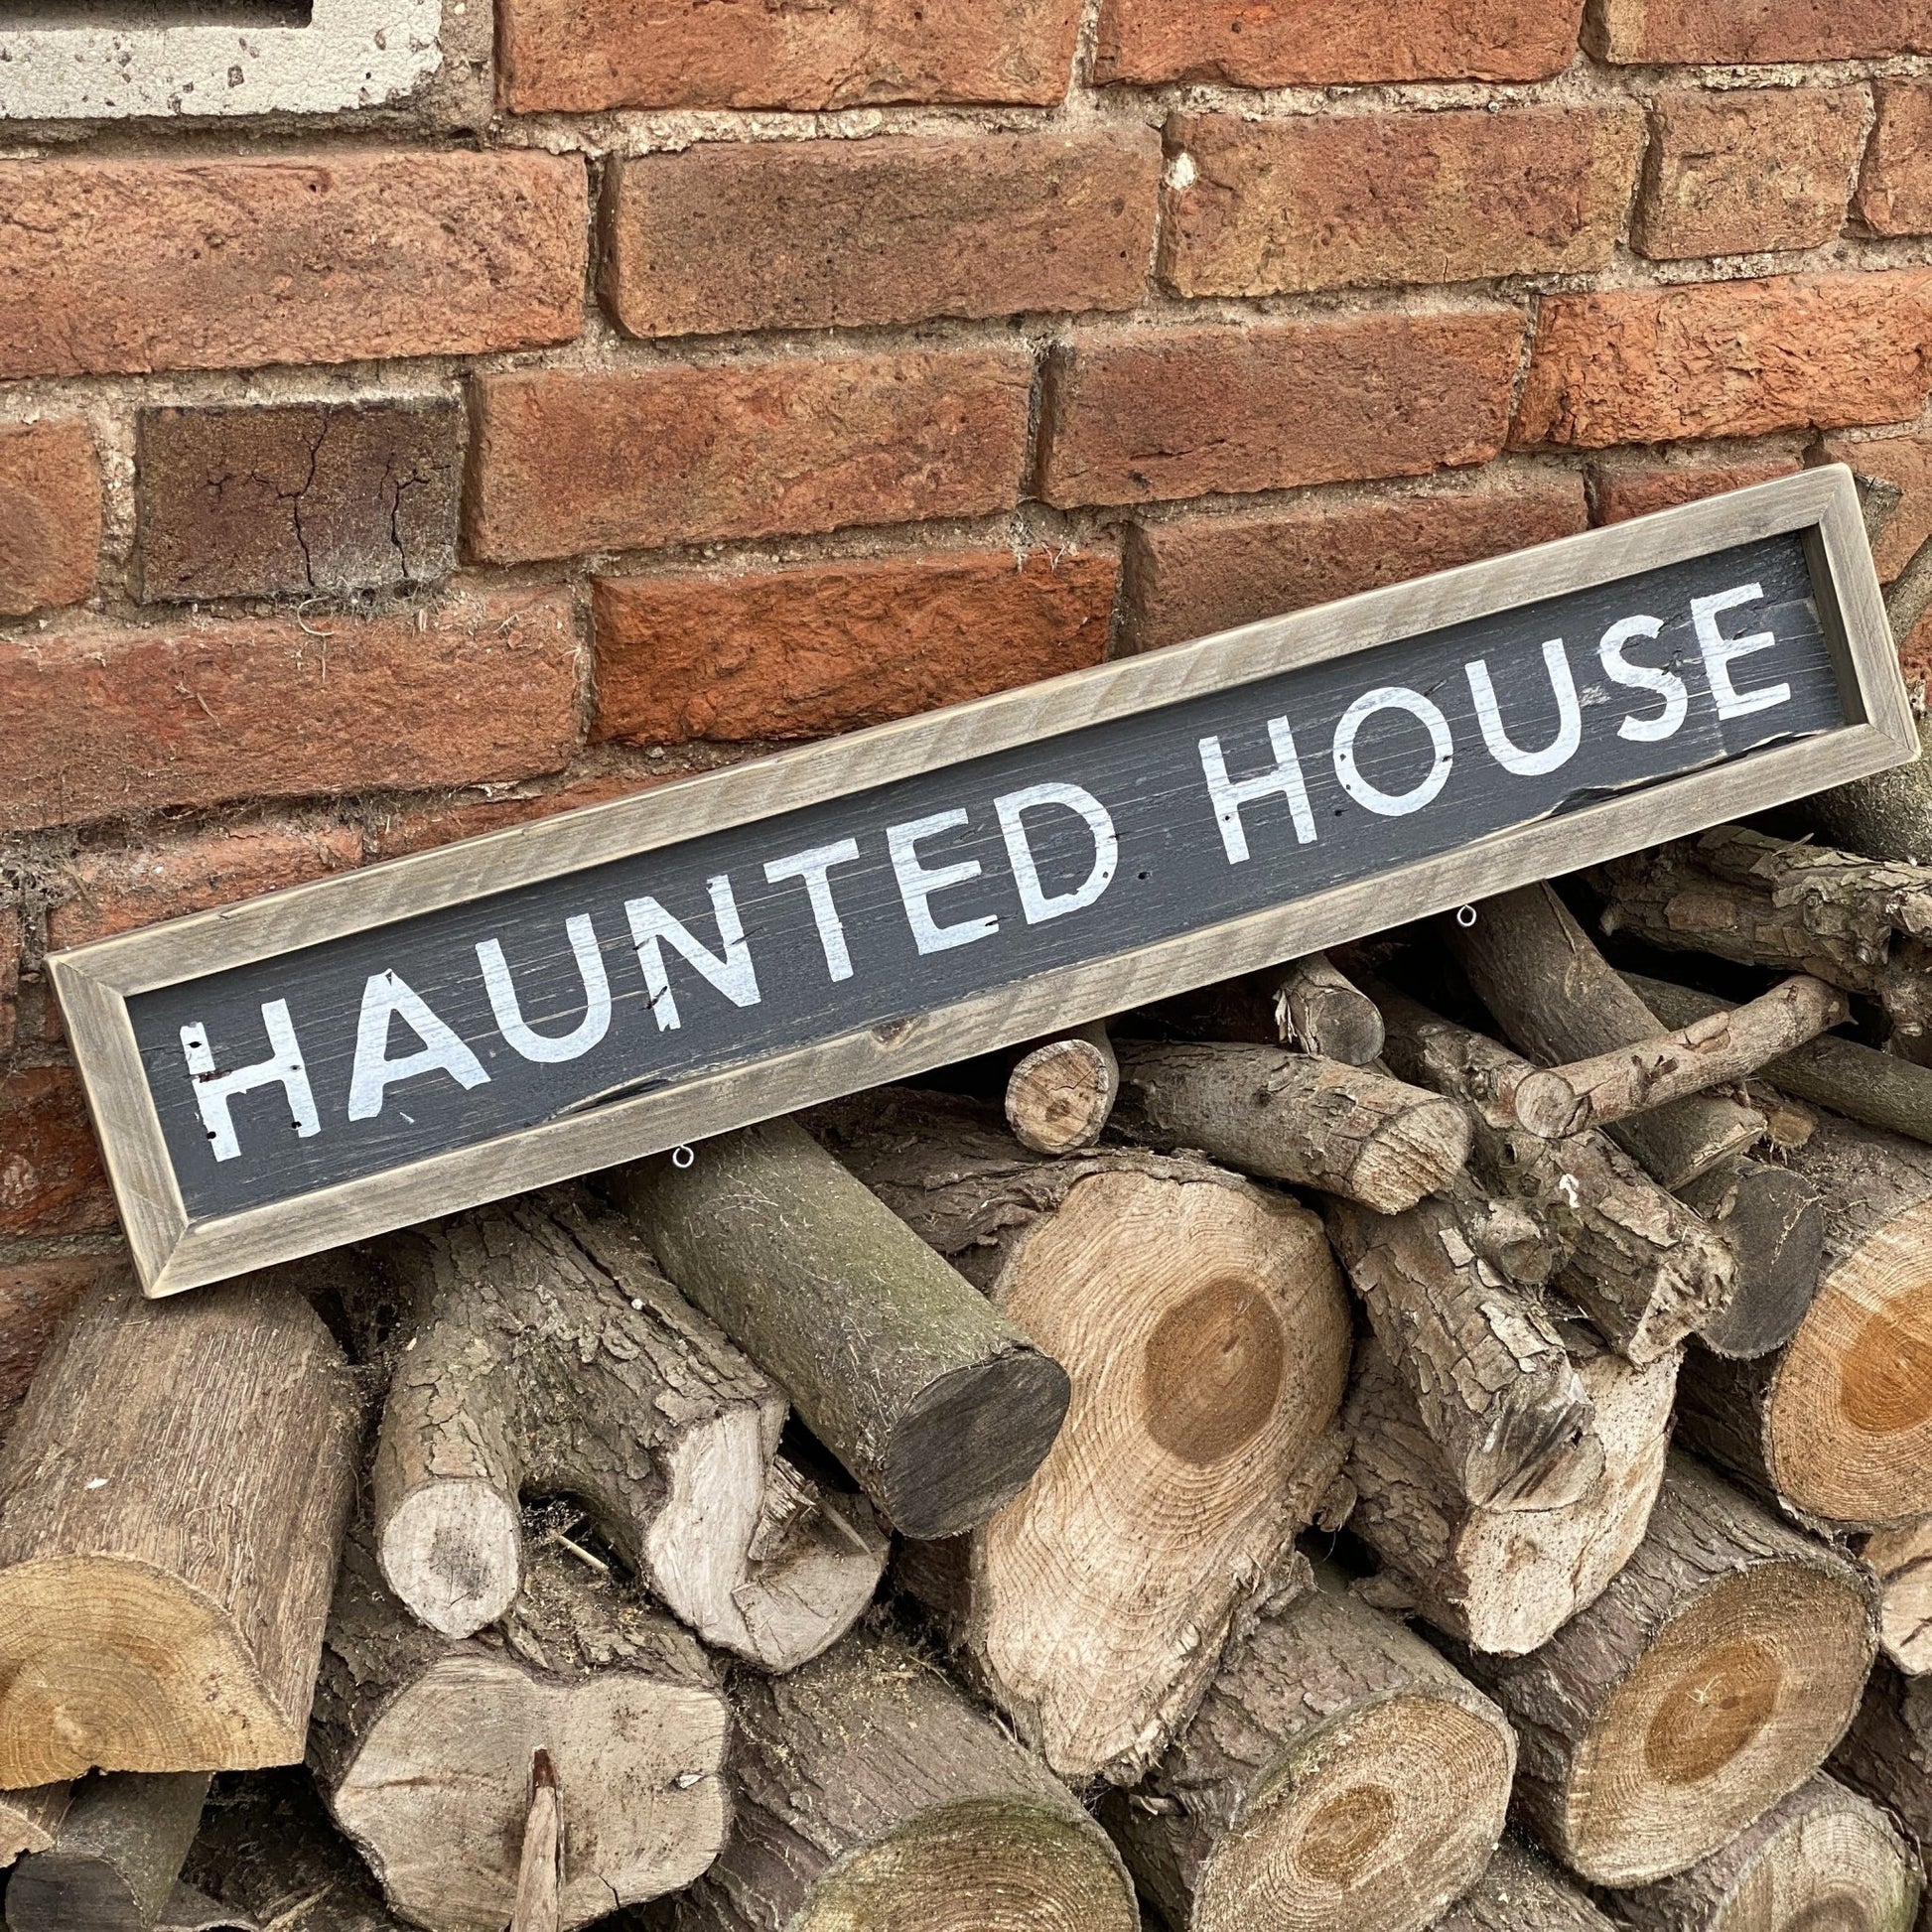 Haunted House | Framed Rustic Long Wood Sign - The Imperfect Wood Company - Rustic Framed Long Wood Sign